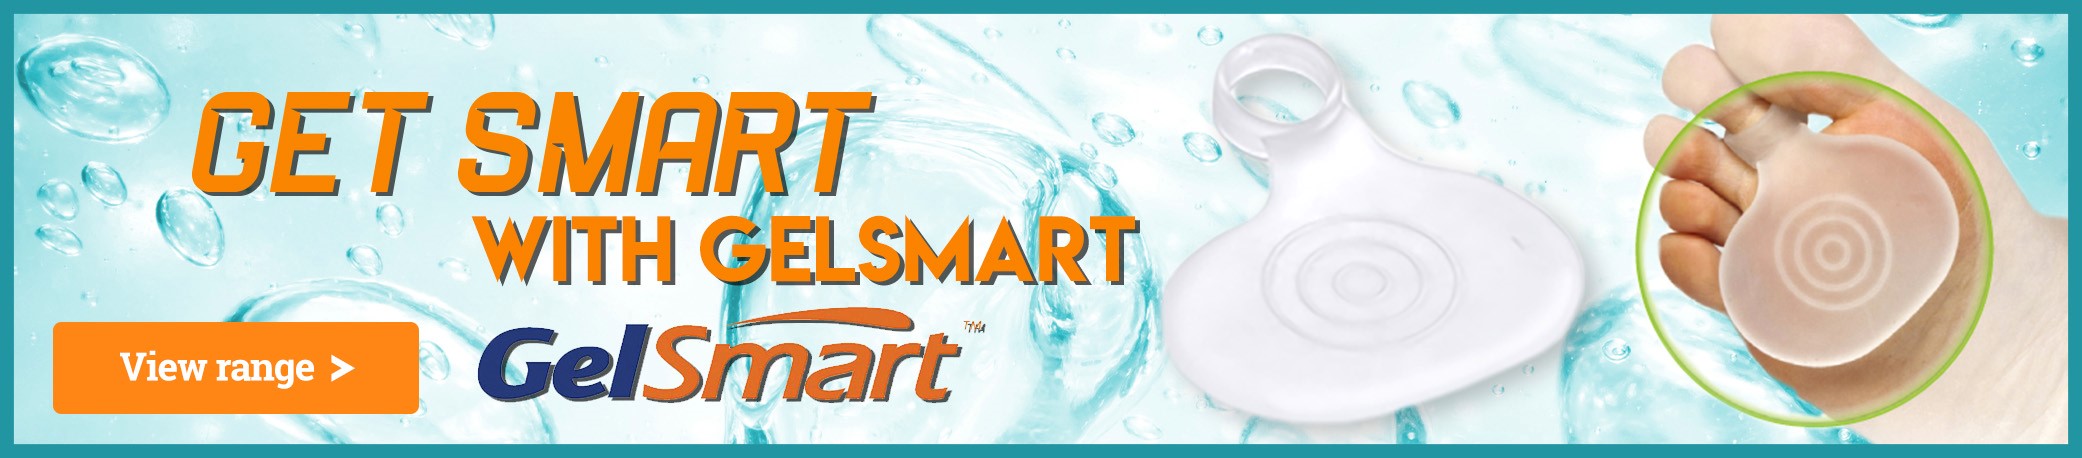 Visit our GelSmart Category to See Our Full Range of GelSmart Insoles